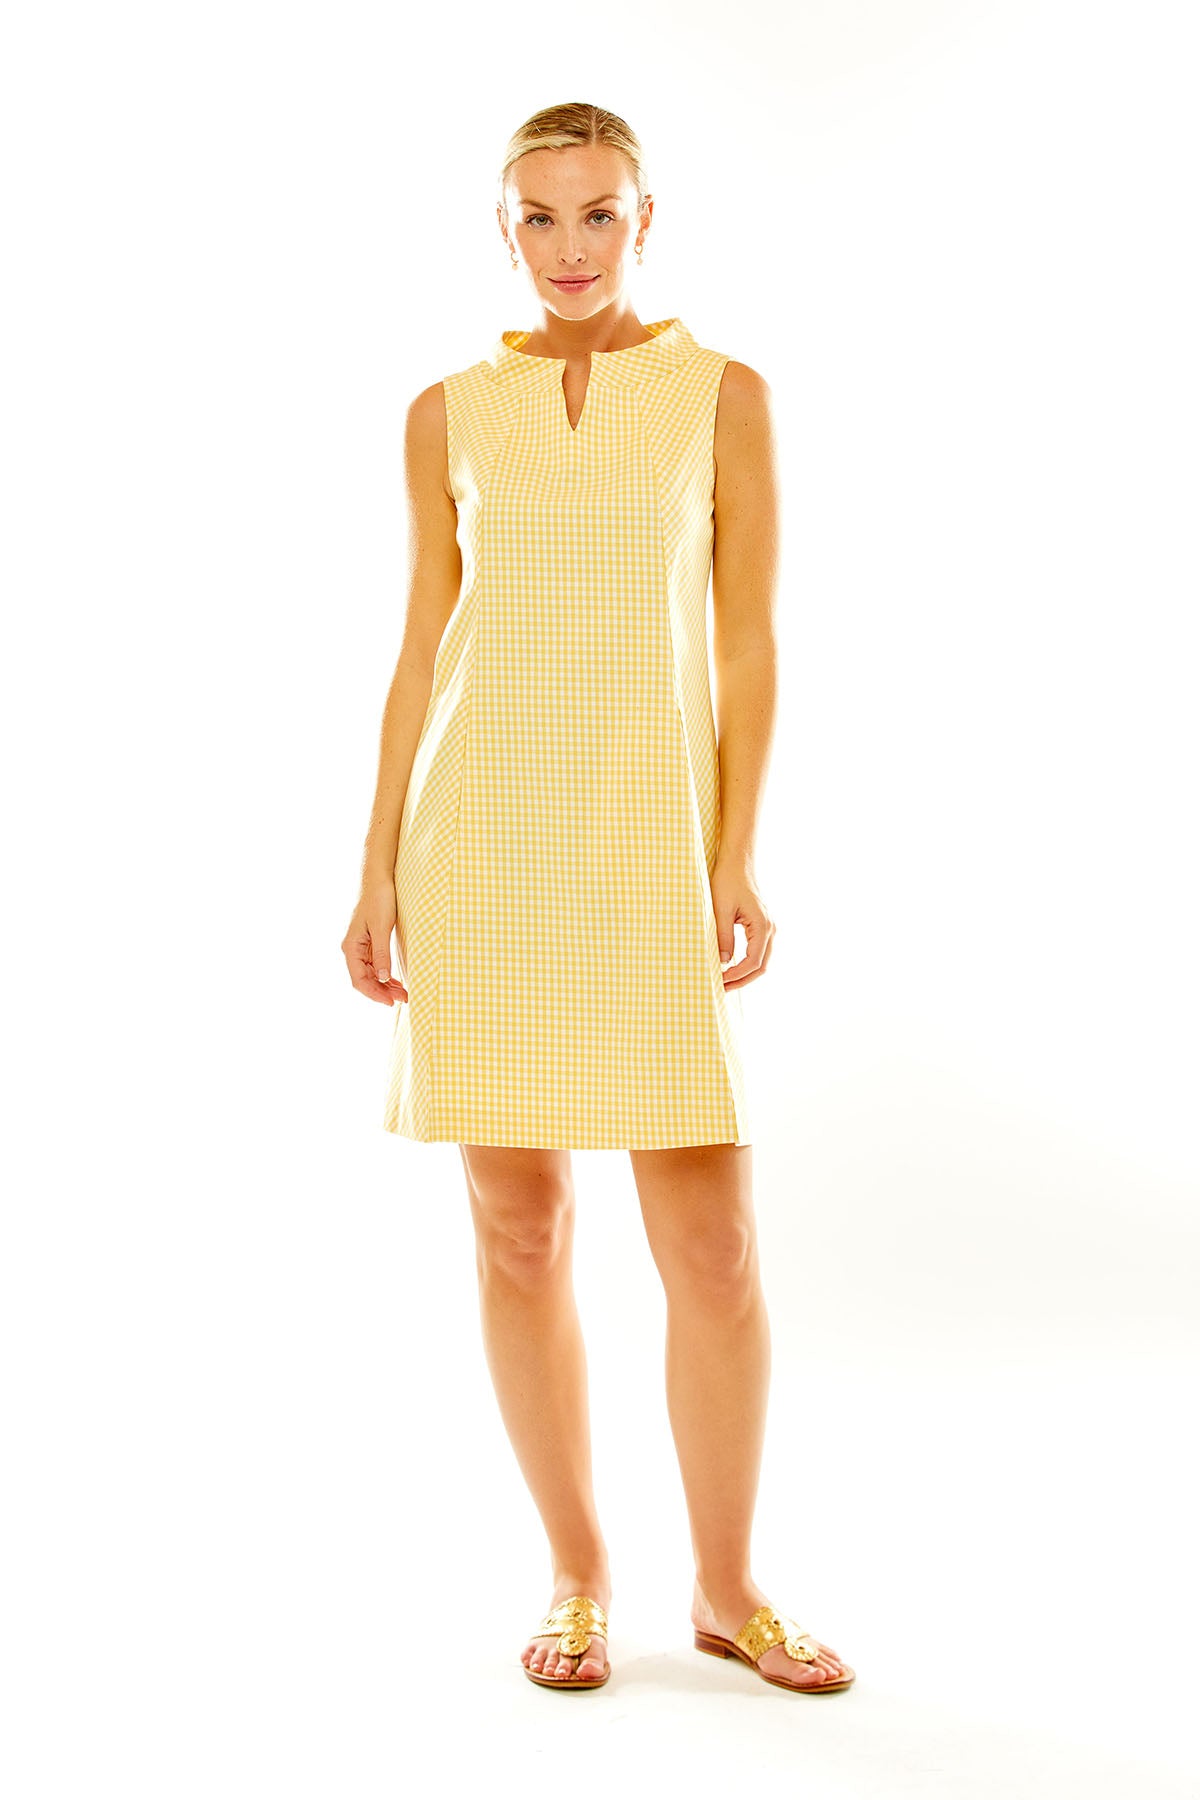 Woman in yellow gingham dress